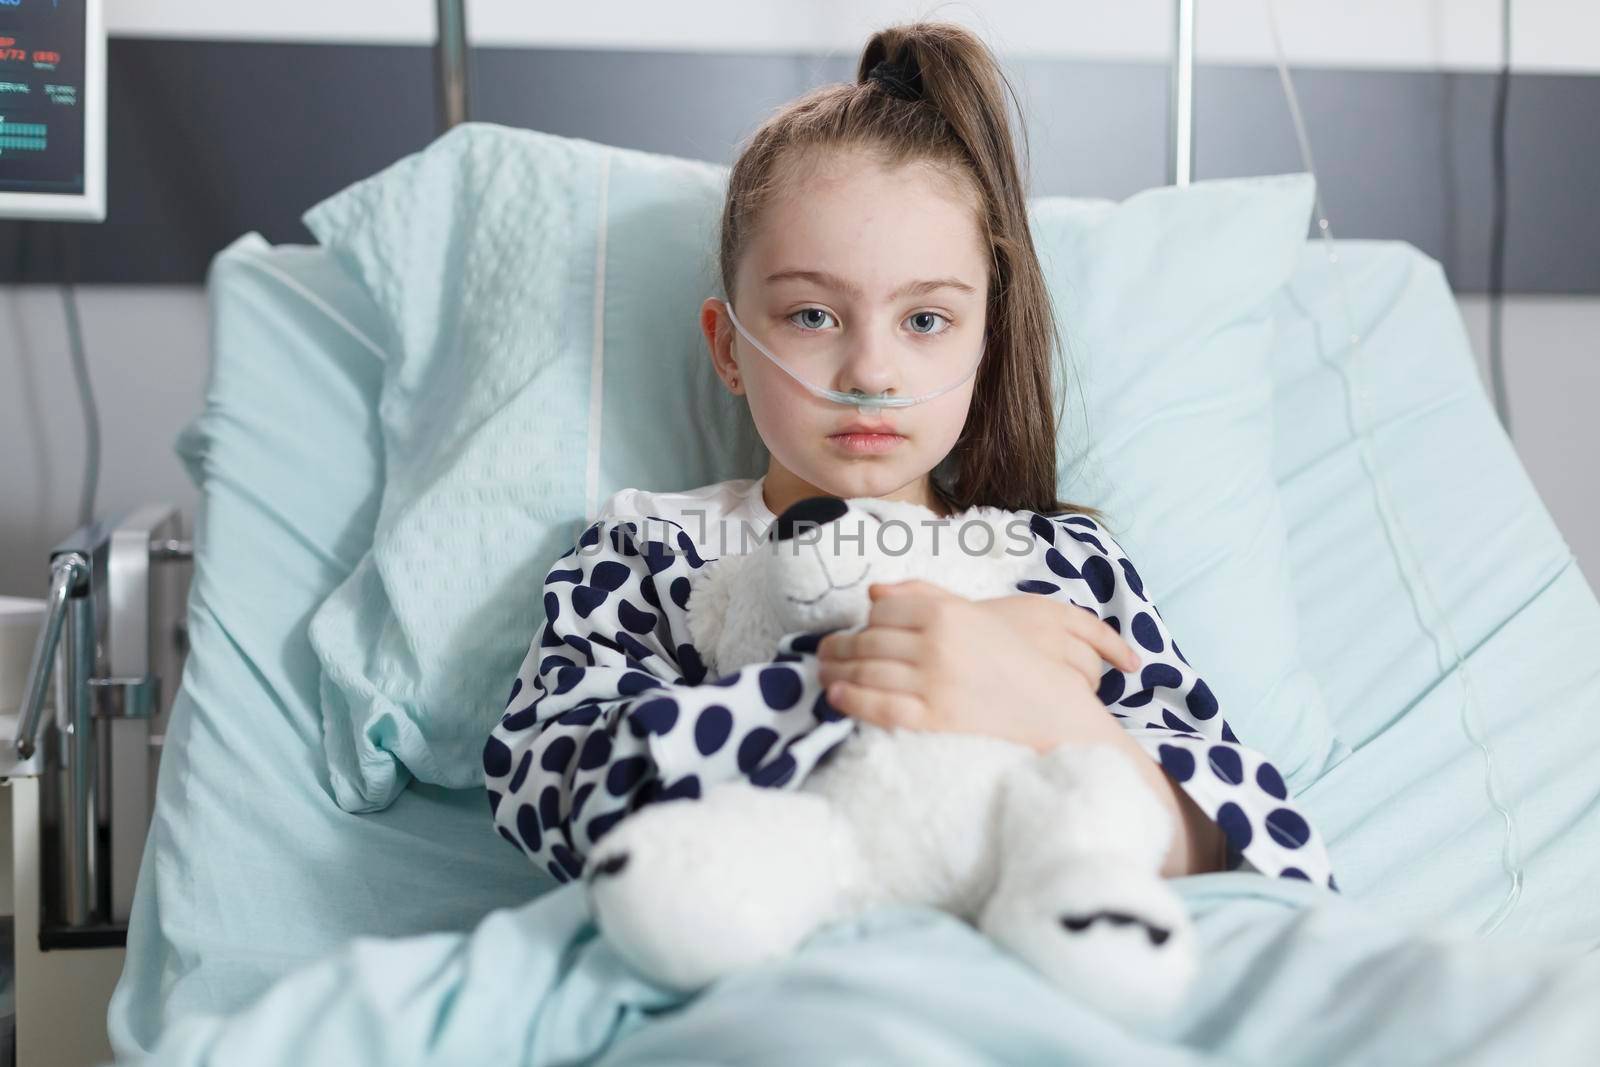 Sick kid holding teddybear and wearing oxygen tube while resting alone in pediatric clinic bed. Unhealthy child in healthcare pediatric hospital patients treatment ward room while looking at camera.